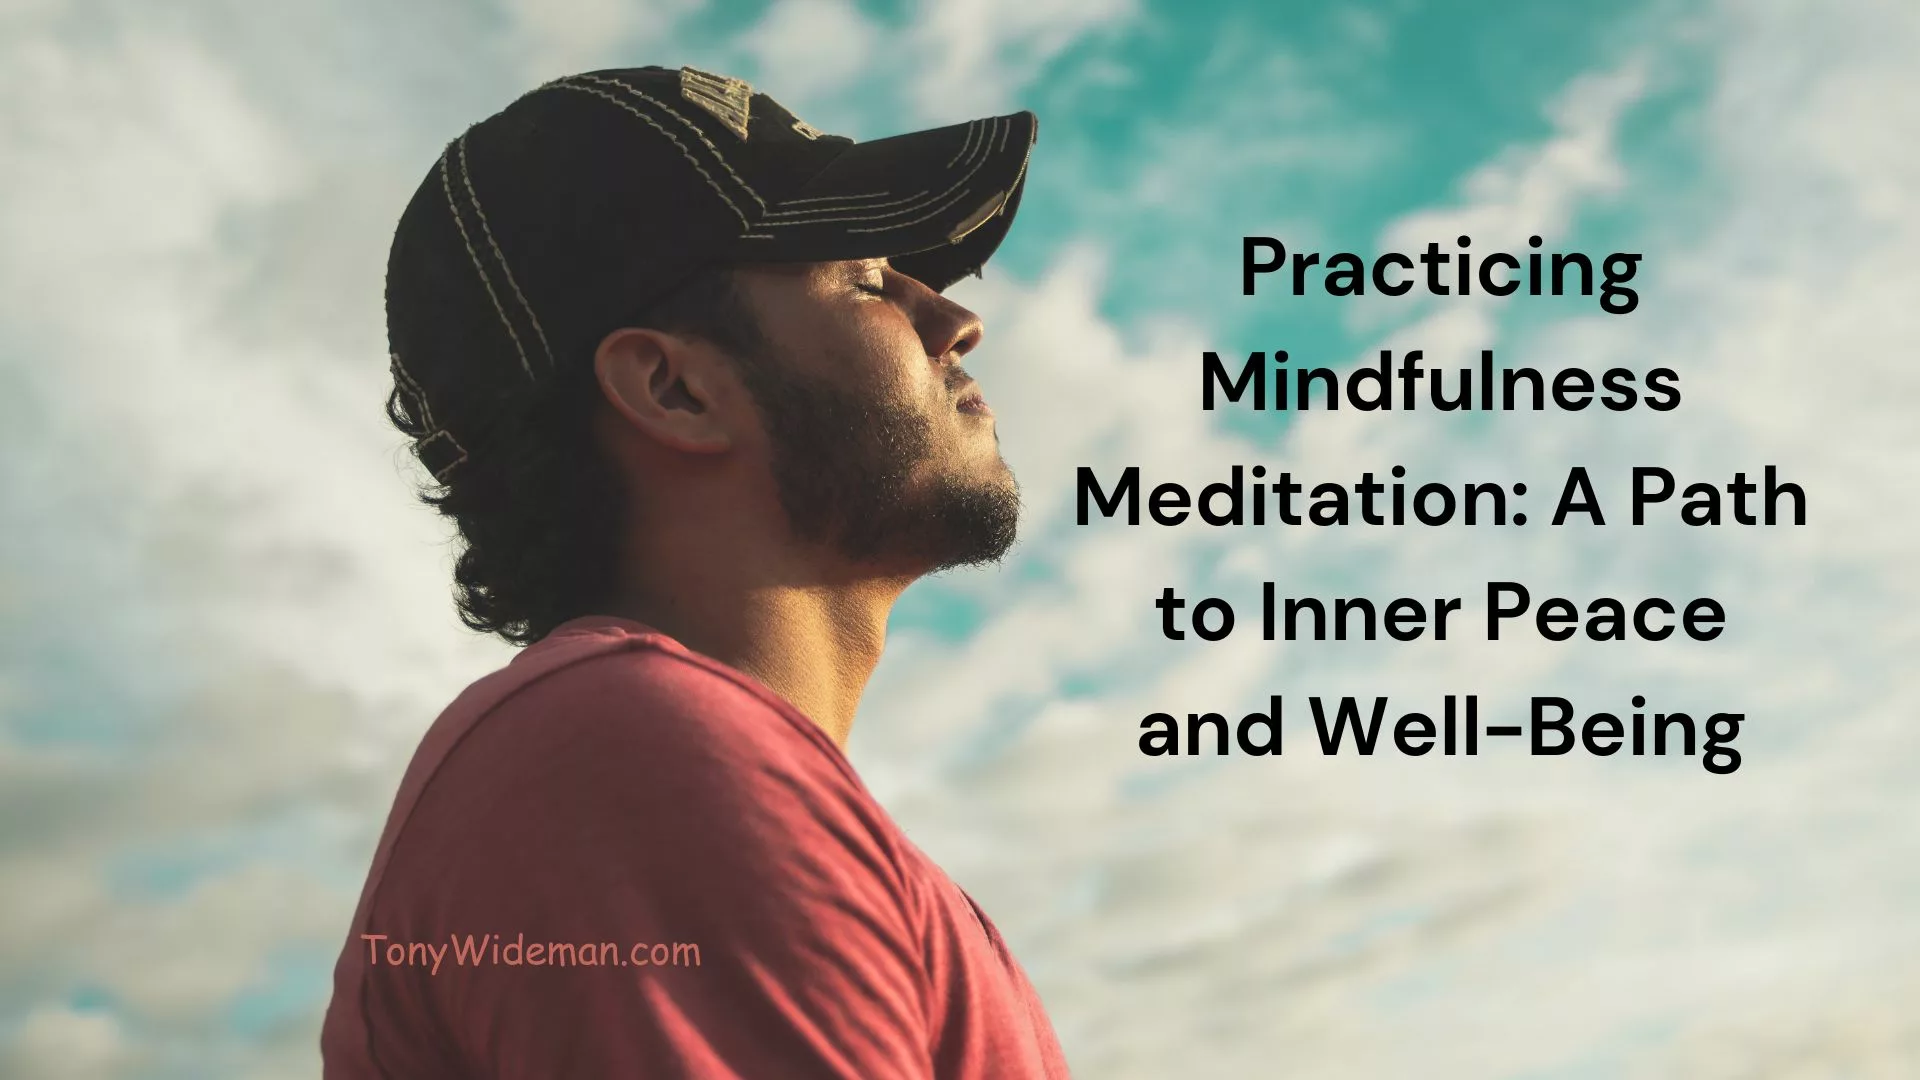 Practicing Mindfulness Meditation: A Path to Inner Peace and Well-Being